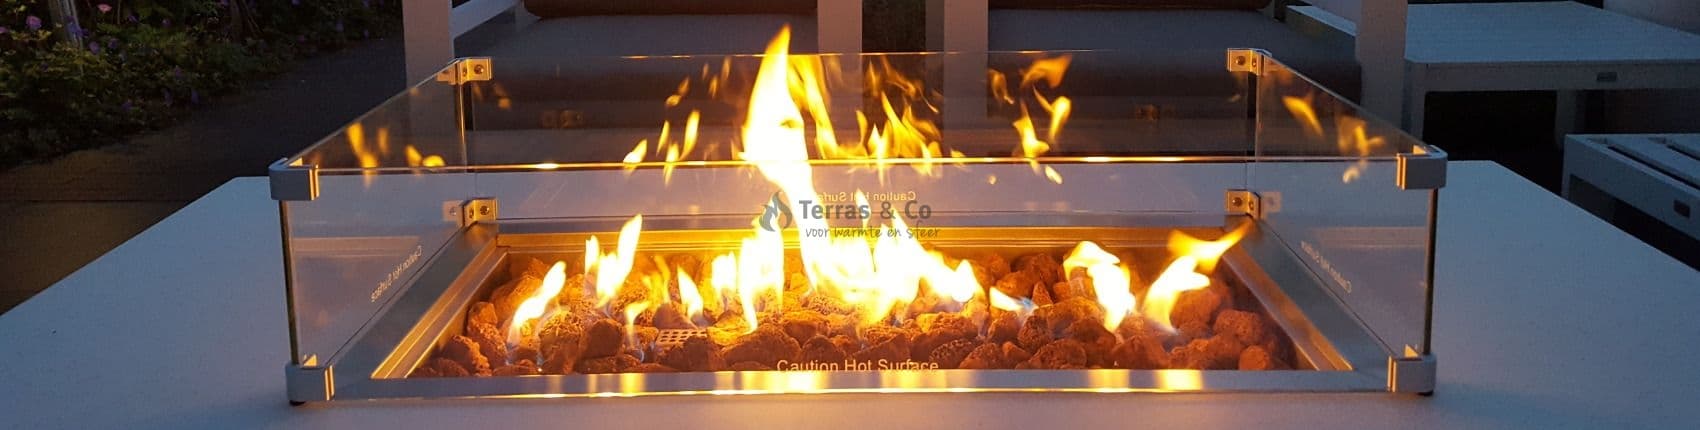 Web store for the most beautiful Fire Tables, Built-in Burners & Outdoor Fireplaces!